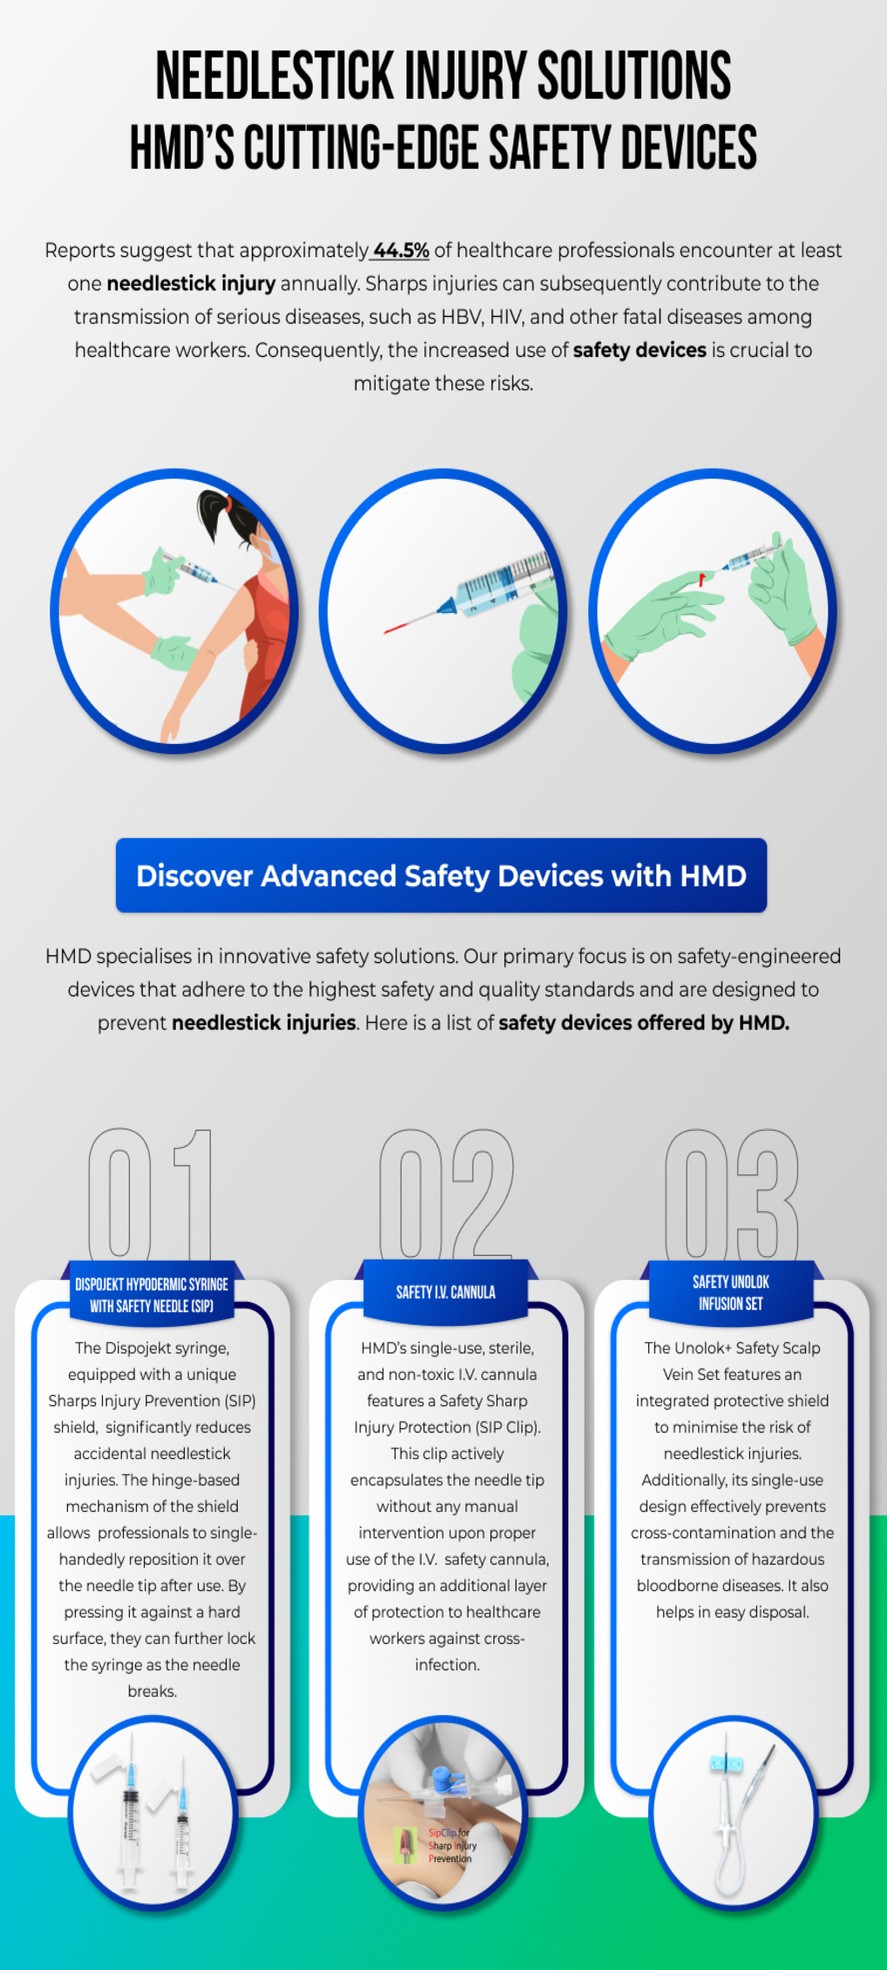 NEEDLESTICKS INJURY SOLUTIONS HMD’S CUTTING-EDGE SAFETY DEVICES